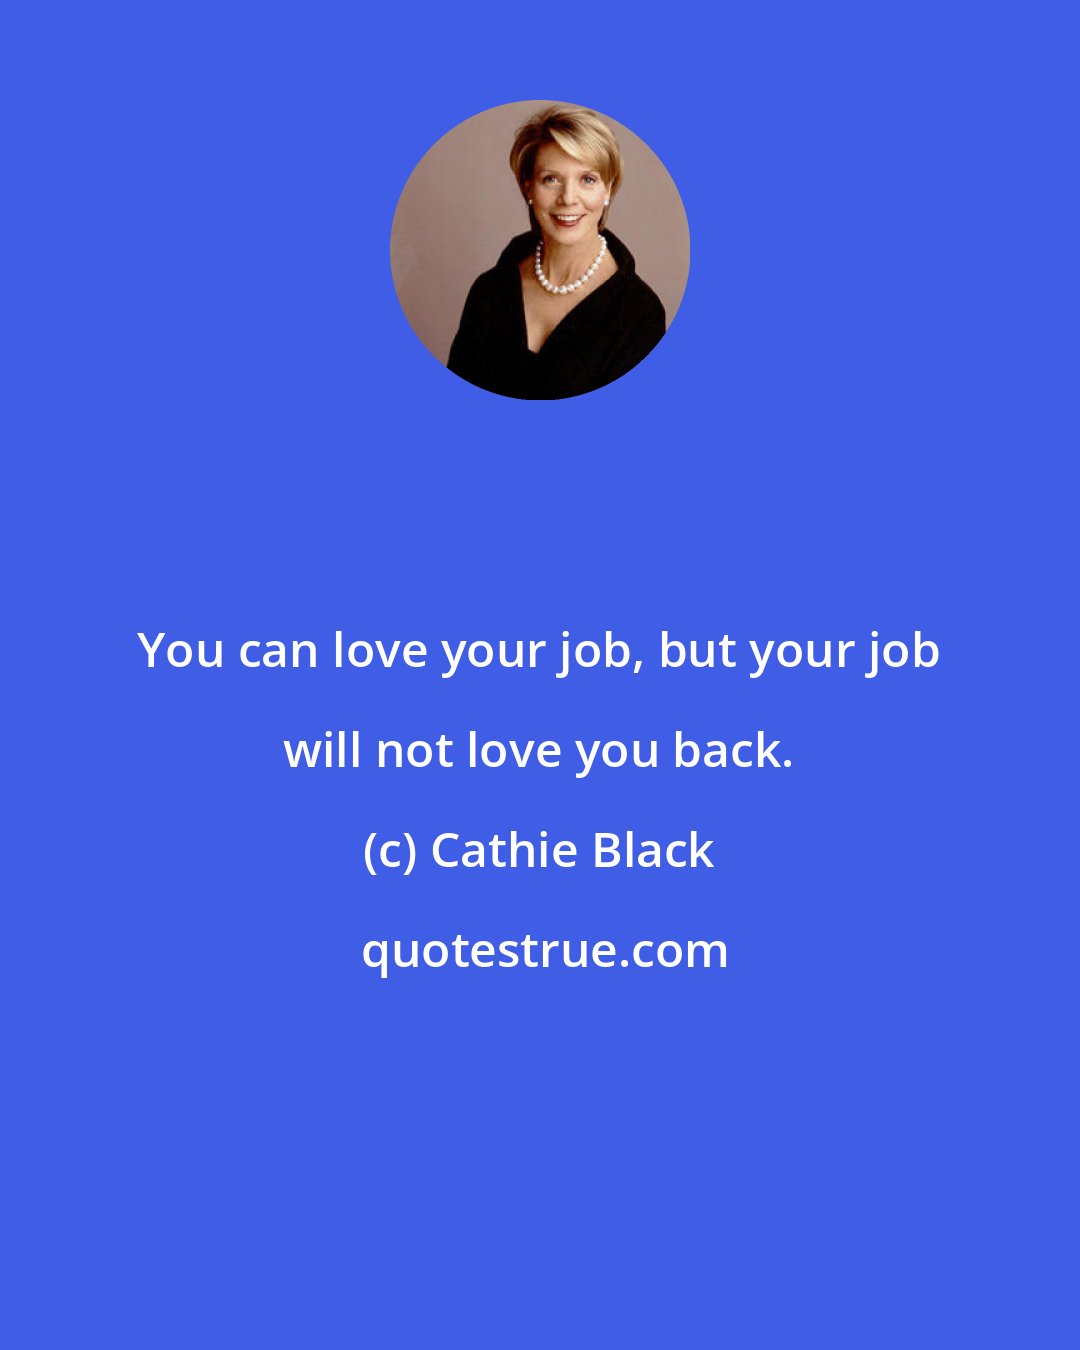 Cathie Black: You can love your job, but your job will not love you back.